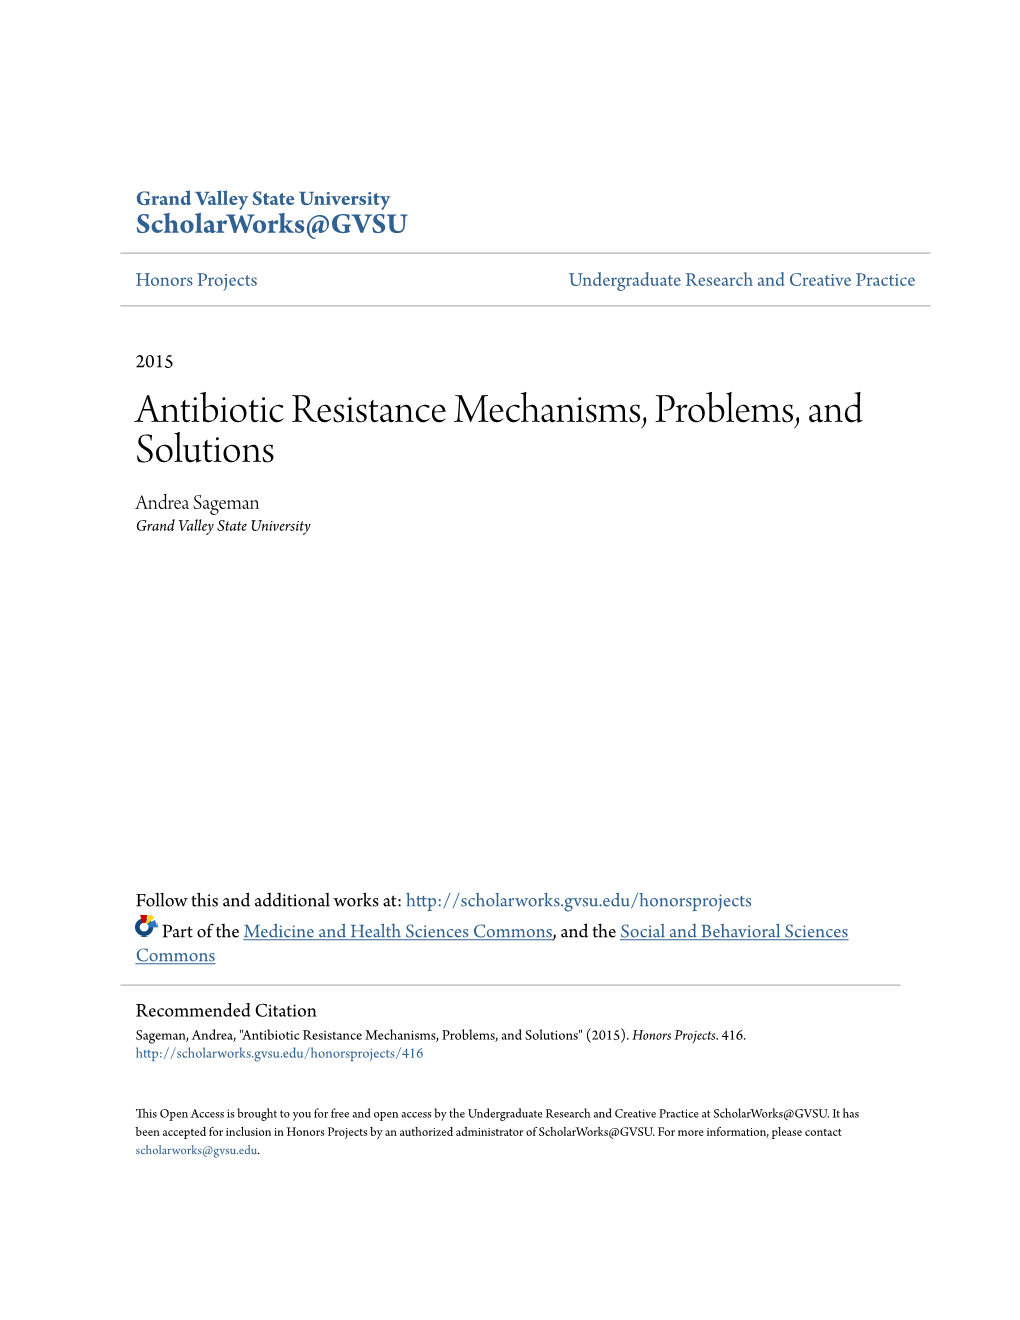 Antibiotic Resistance Mechanisms, Problems, and Solutions Andrea Sageman Grand Valley State University